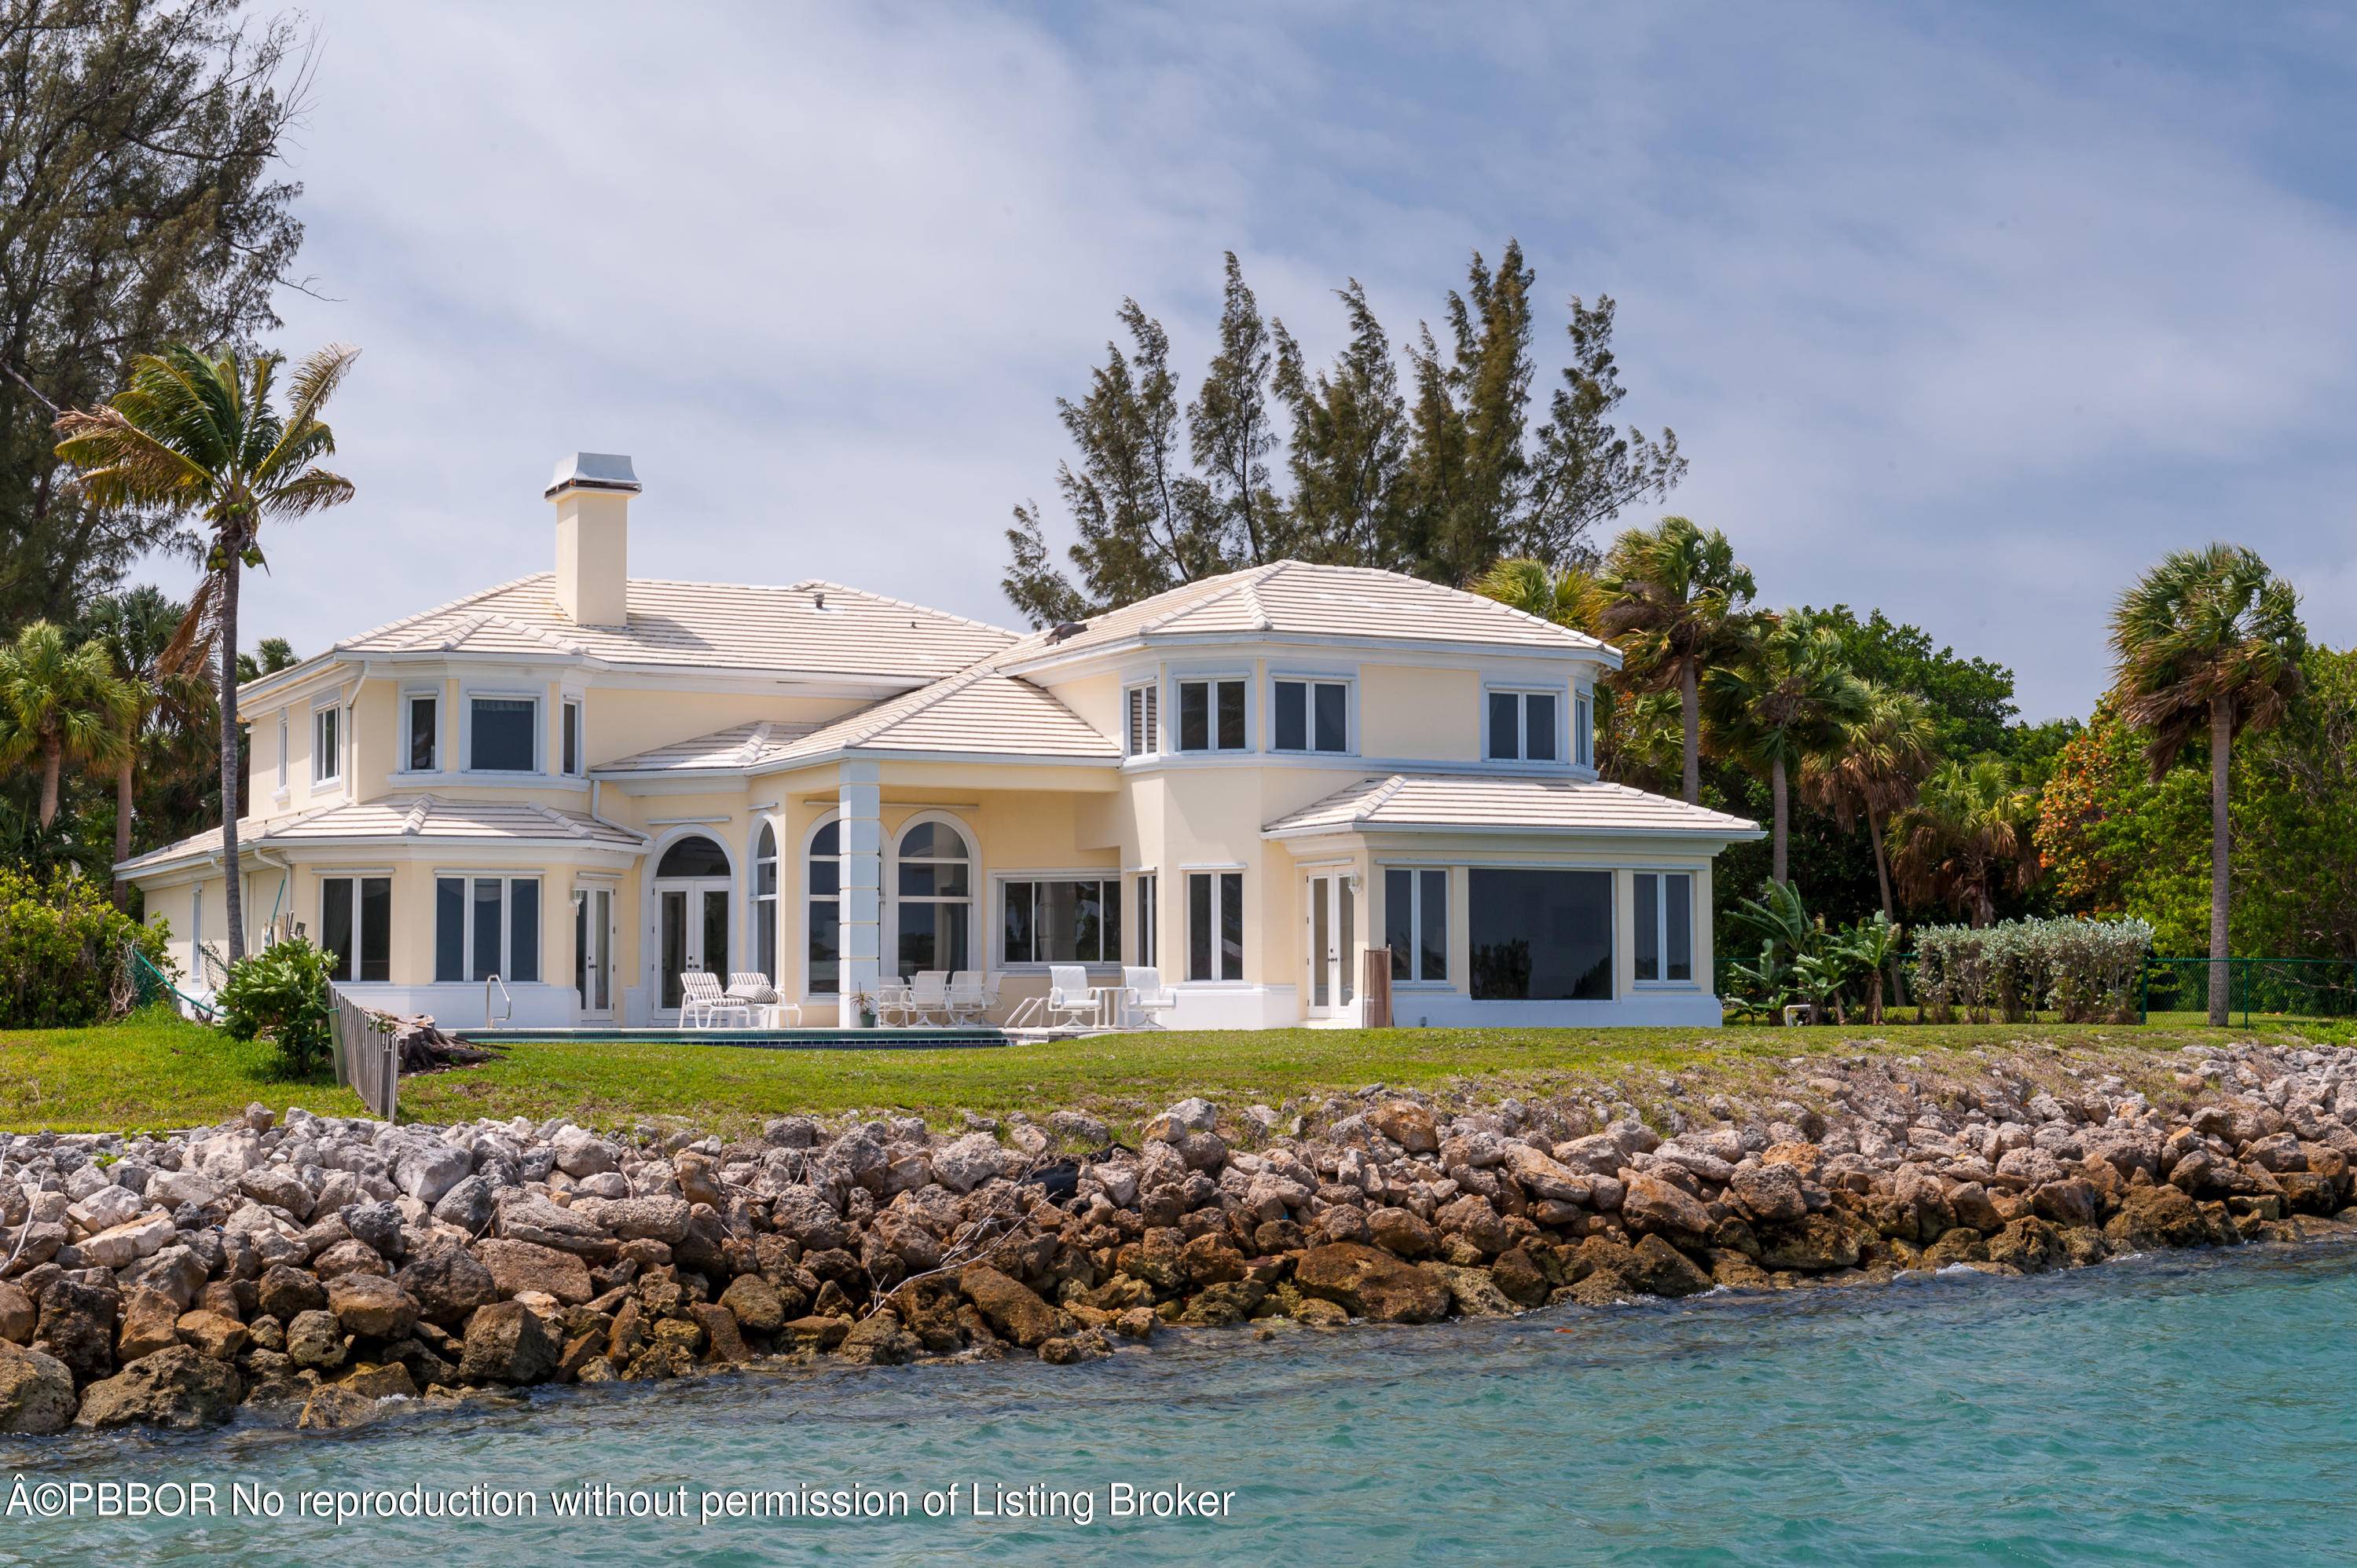 Waterfront, traditional, two story home with 6 bedrooms and 6.